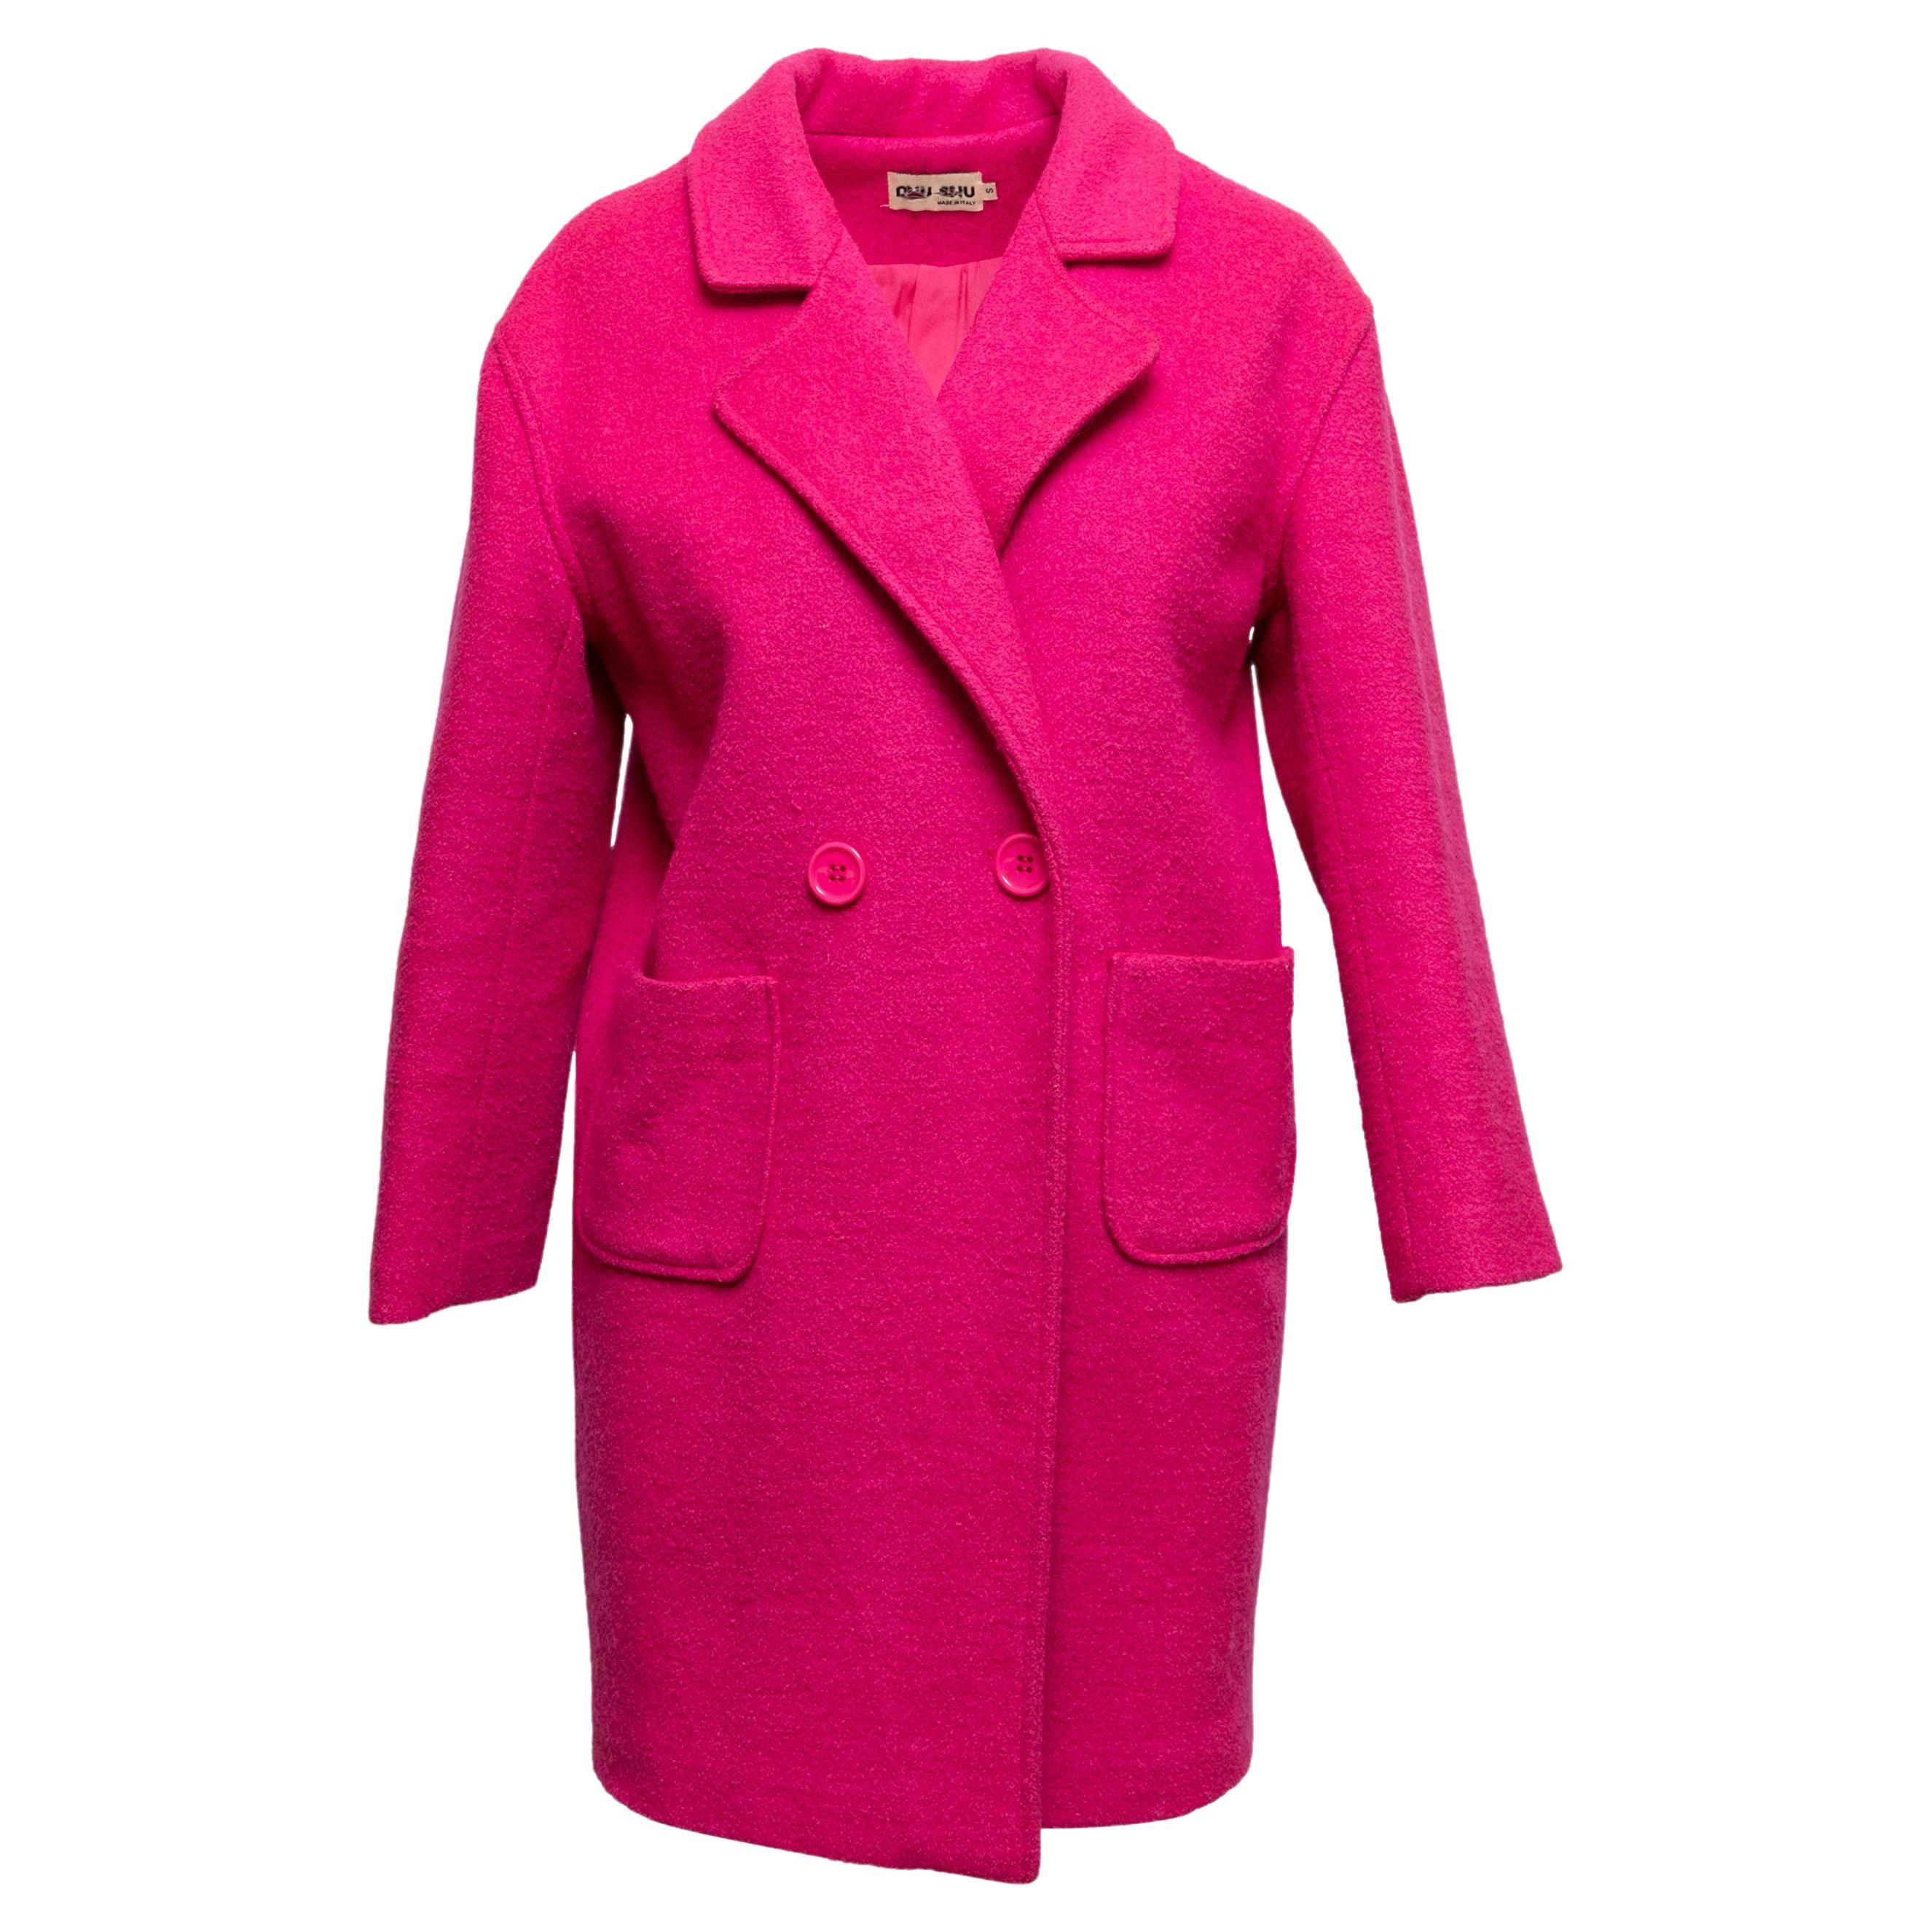 Hot Pink Miu Miu Double-Breasted Wool Coat Size US S